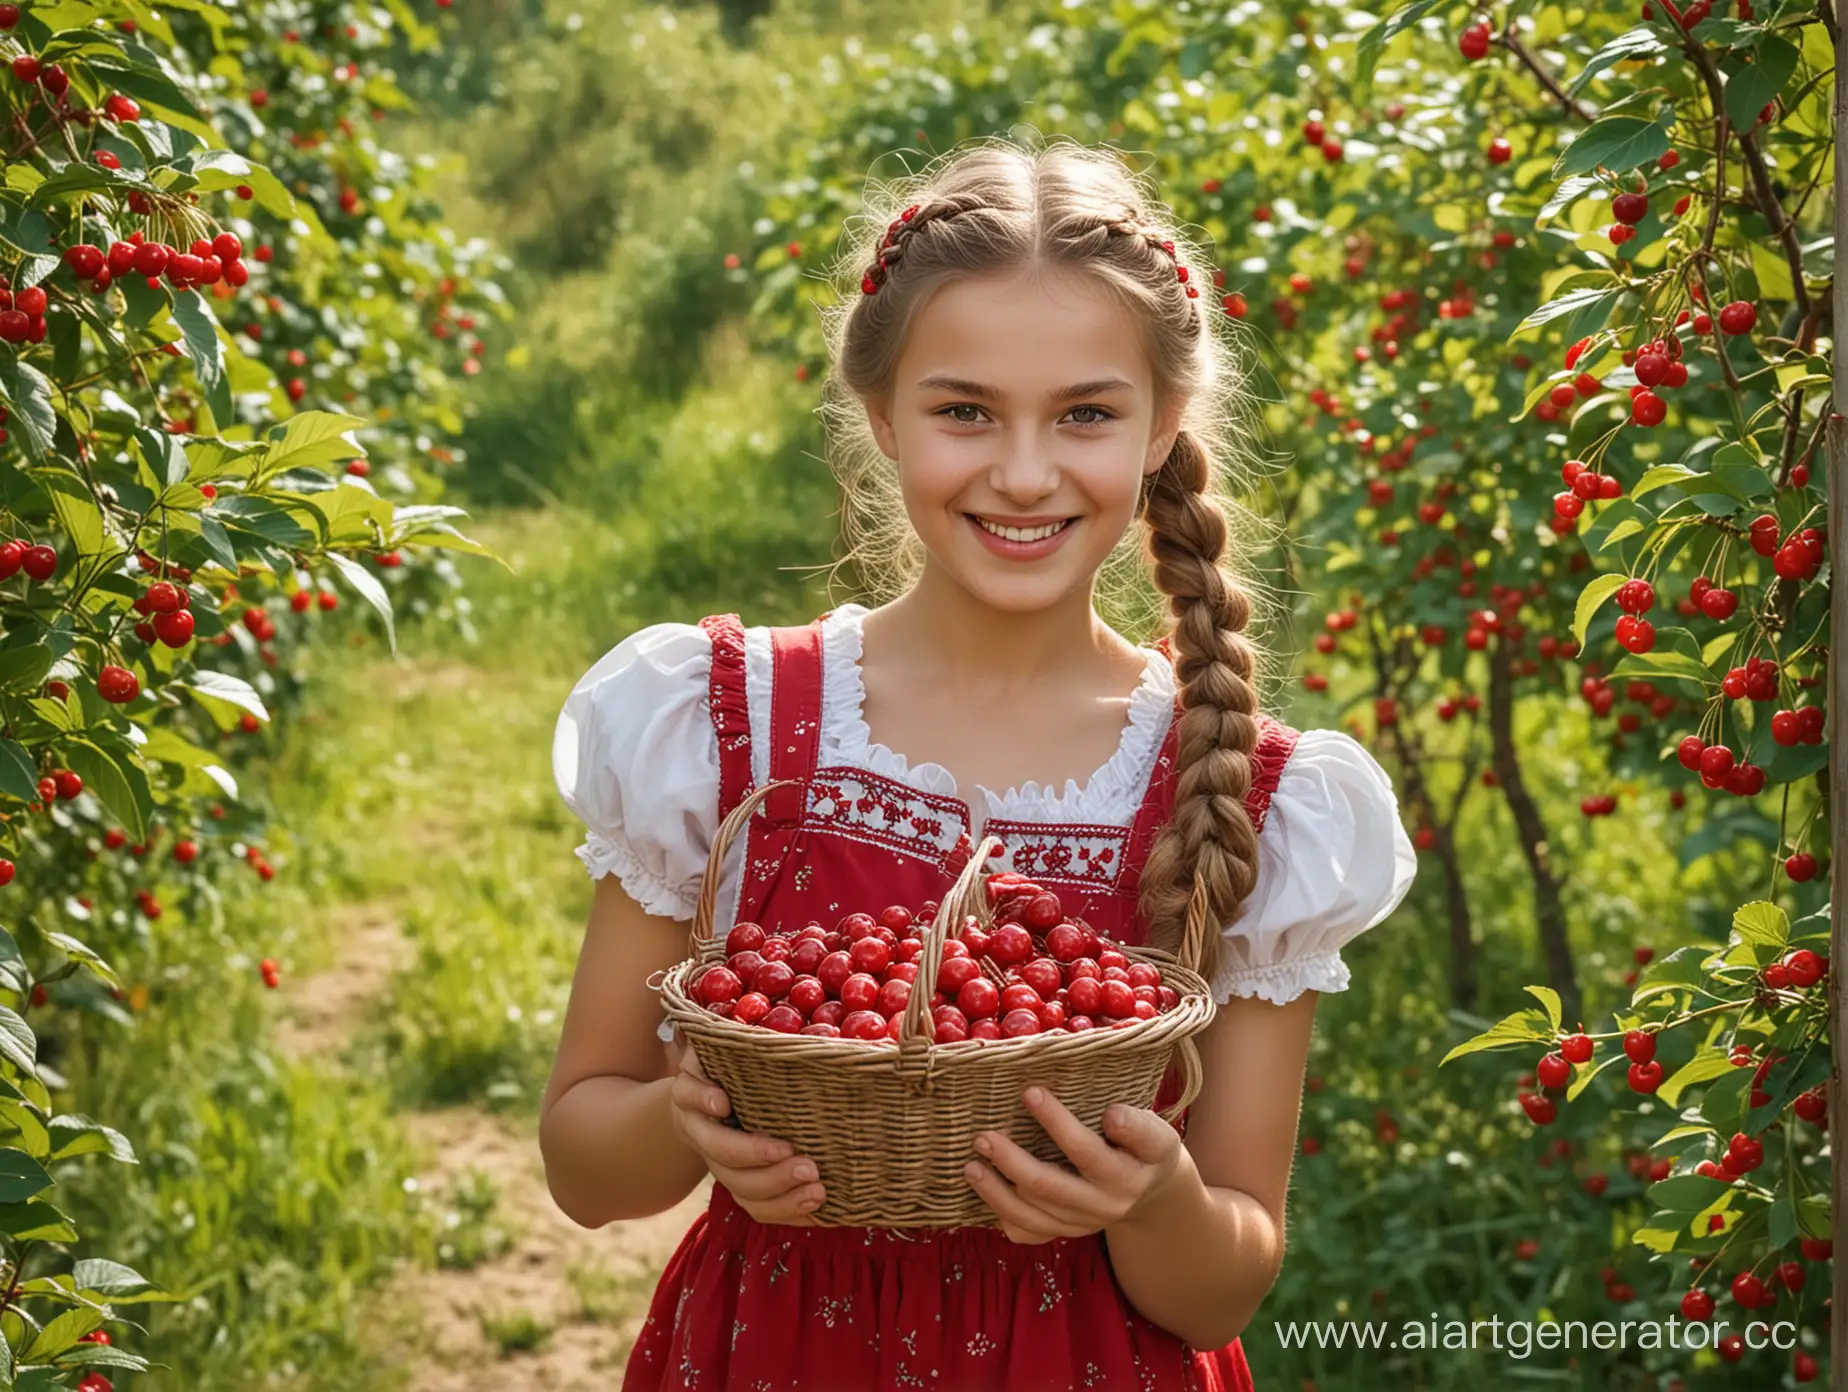 Russian-Country-Girl-Holding-Basket-of-Cherries-in-Cherry-Orchard